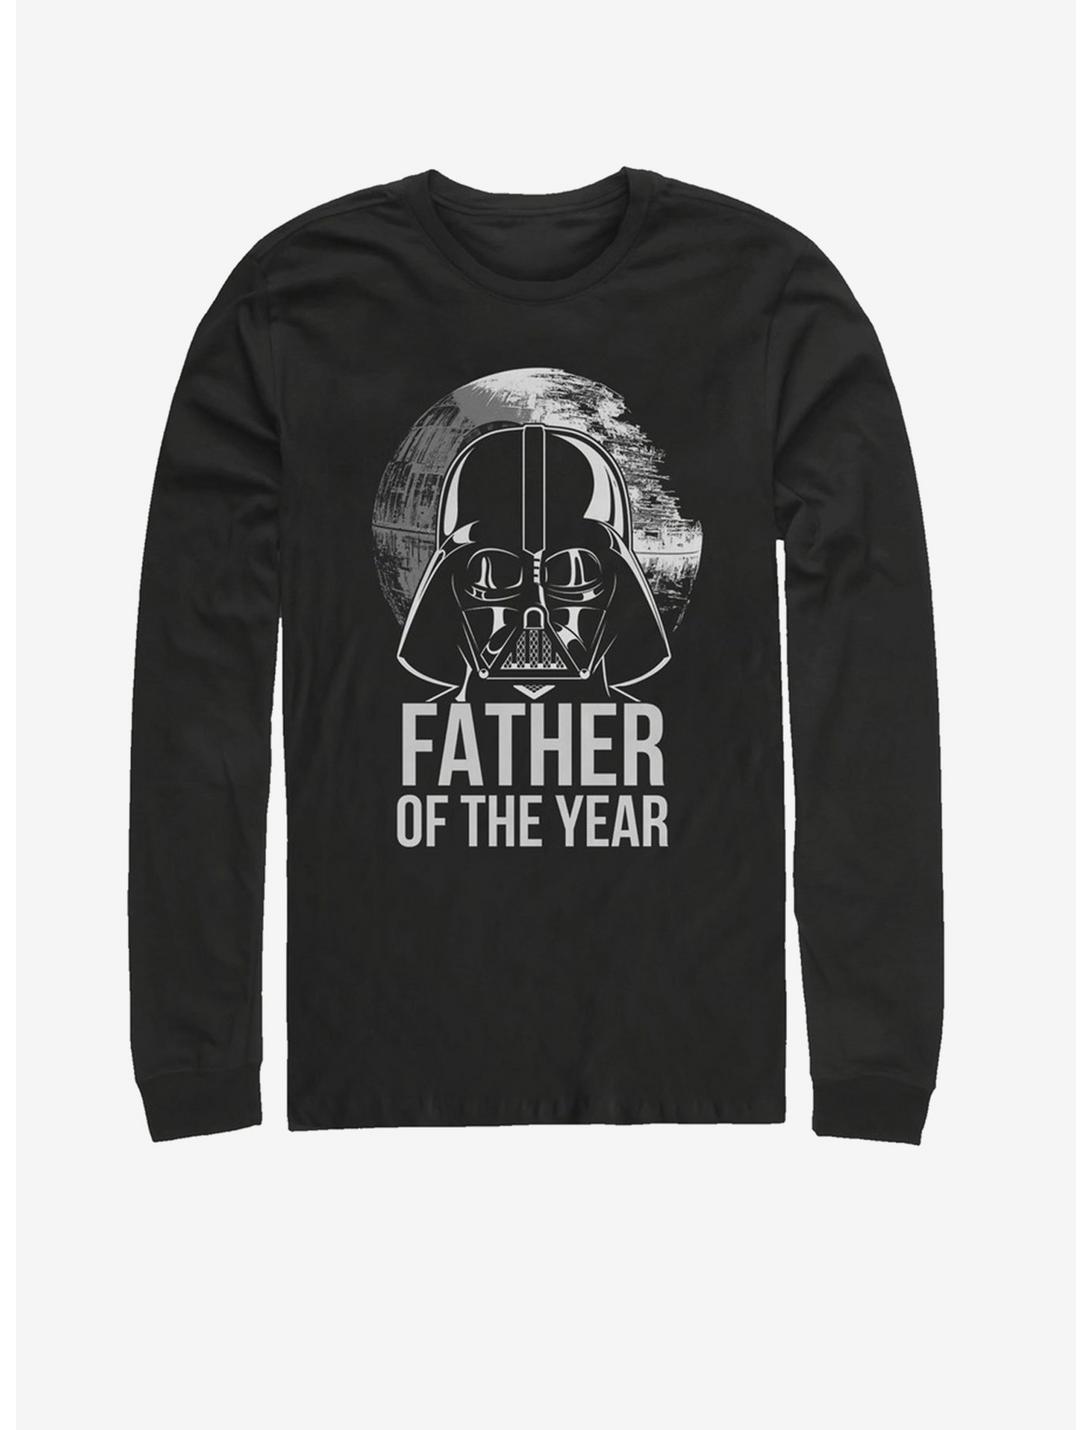 Star Wars Father Of The Year Long-Sleeve T-Shirt, BLACK, hi-res